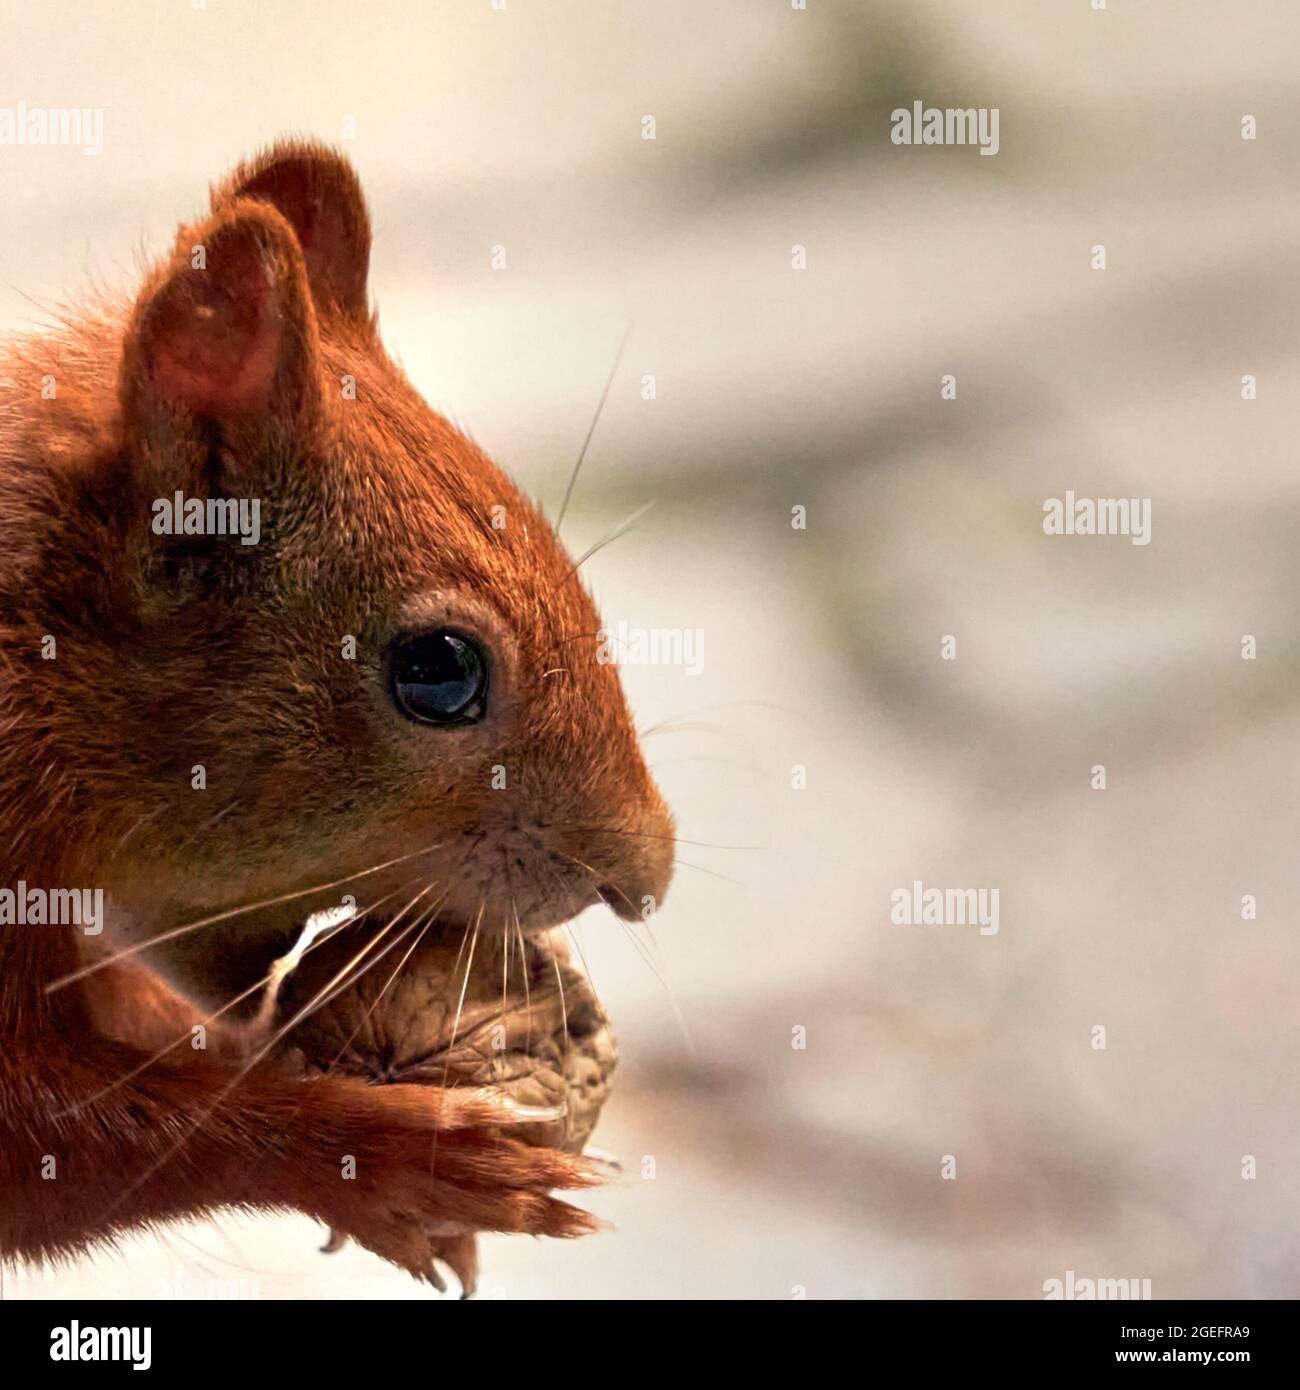 Close-up of head of squirrel, sciurus vulgaris, holding a captured walnut in its paws Stock Photo